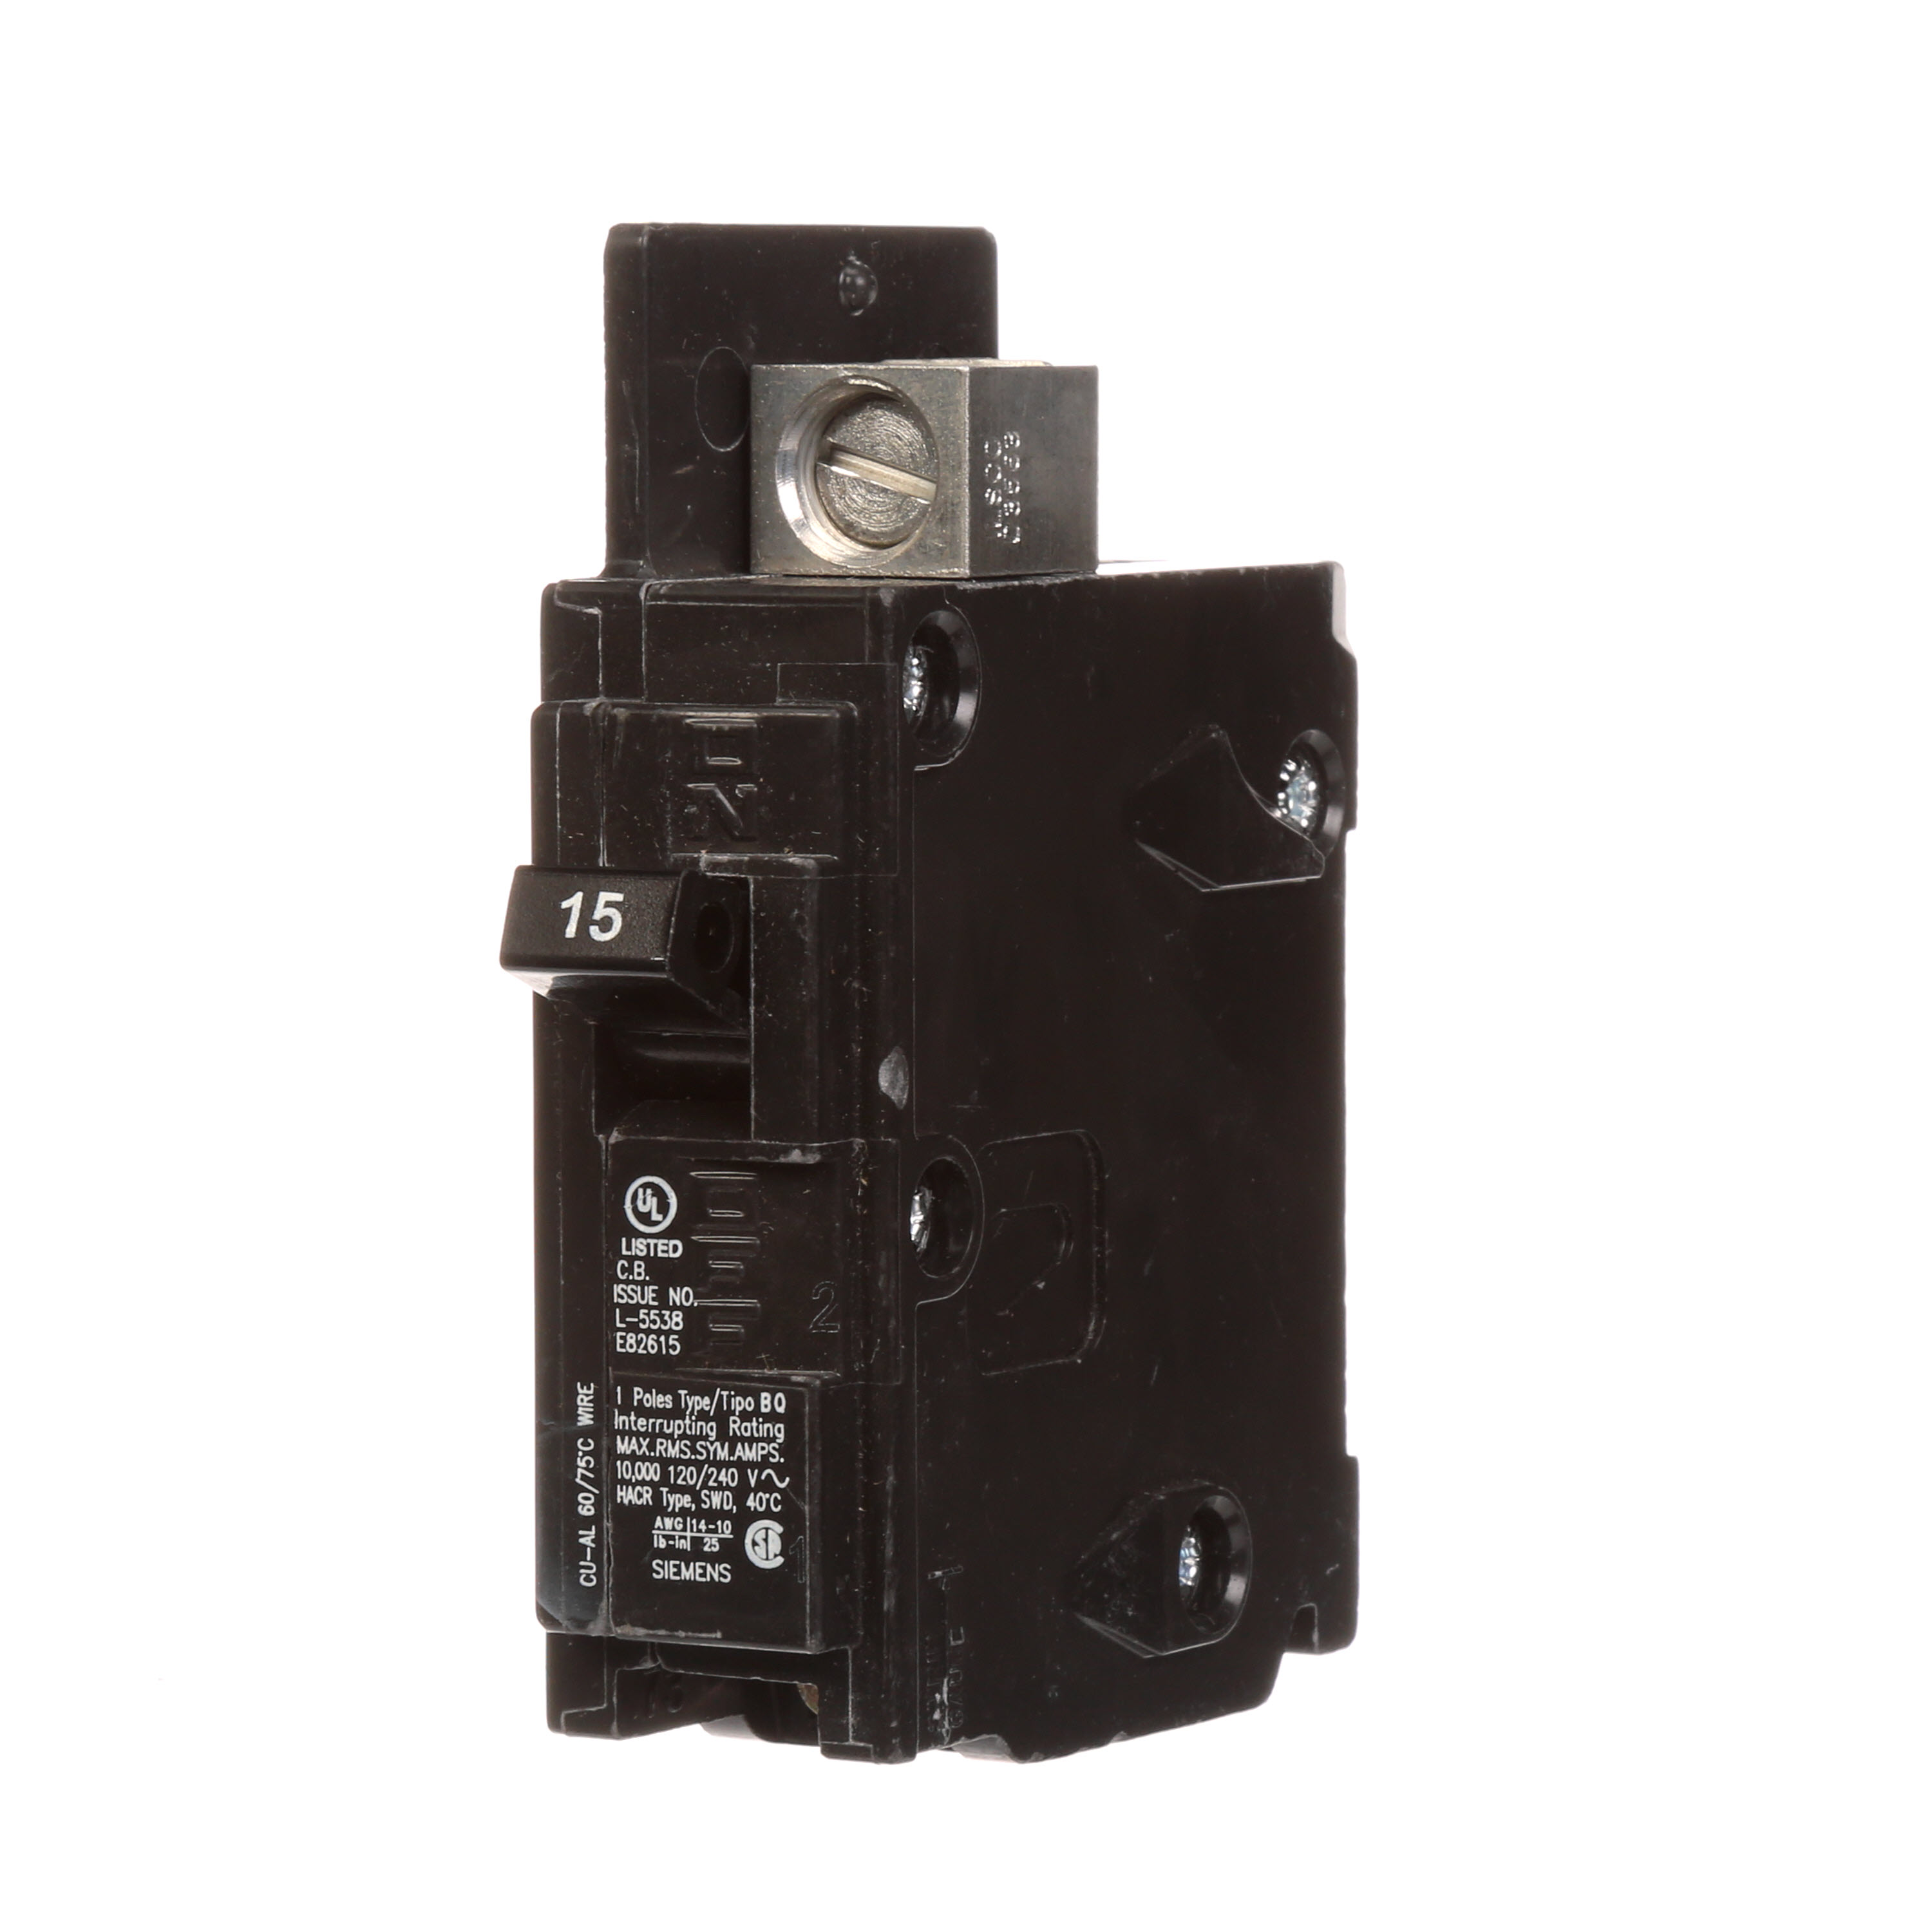 Siemens Low Voltage Molded Case Circuit Breakers General Purpose MCCBs are Circuit Protection Molded Case Circuit Breakers. 1-Pole circuit breaker type BQ. Rated 120V (015A) (AIR 10 kA). Special features line side lugs included. Note Load side lugs are included.